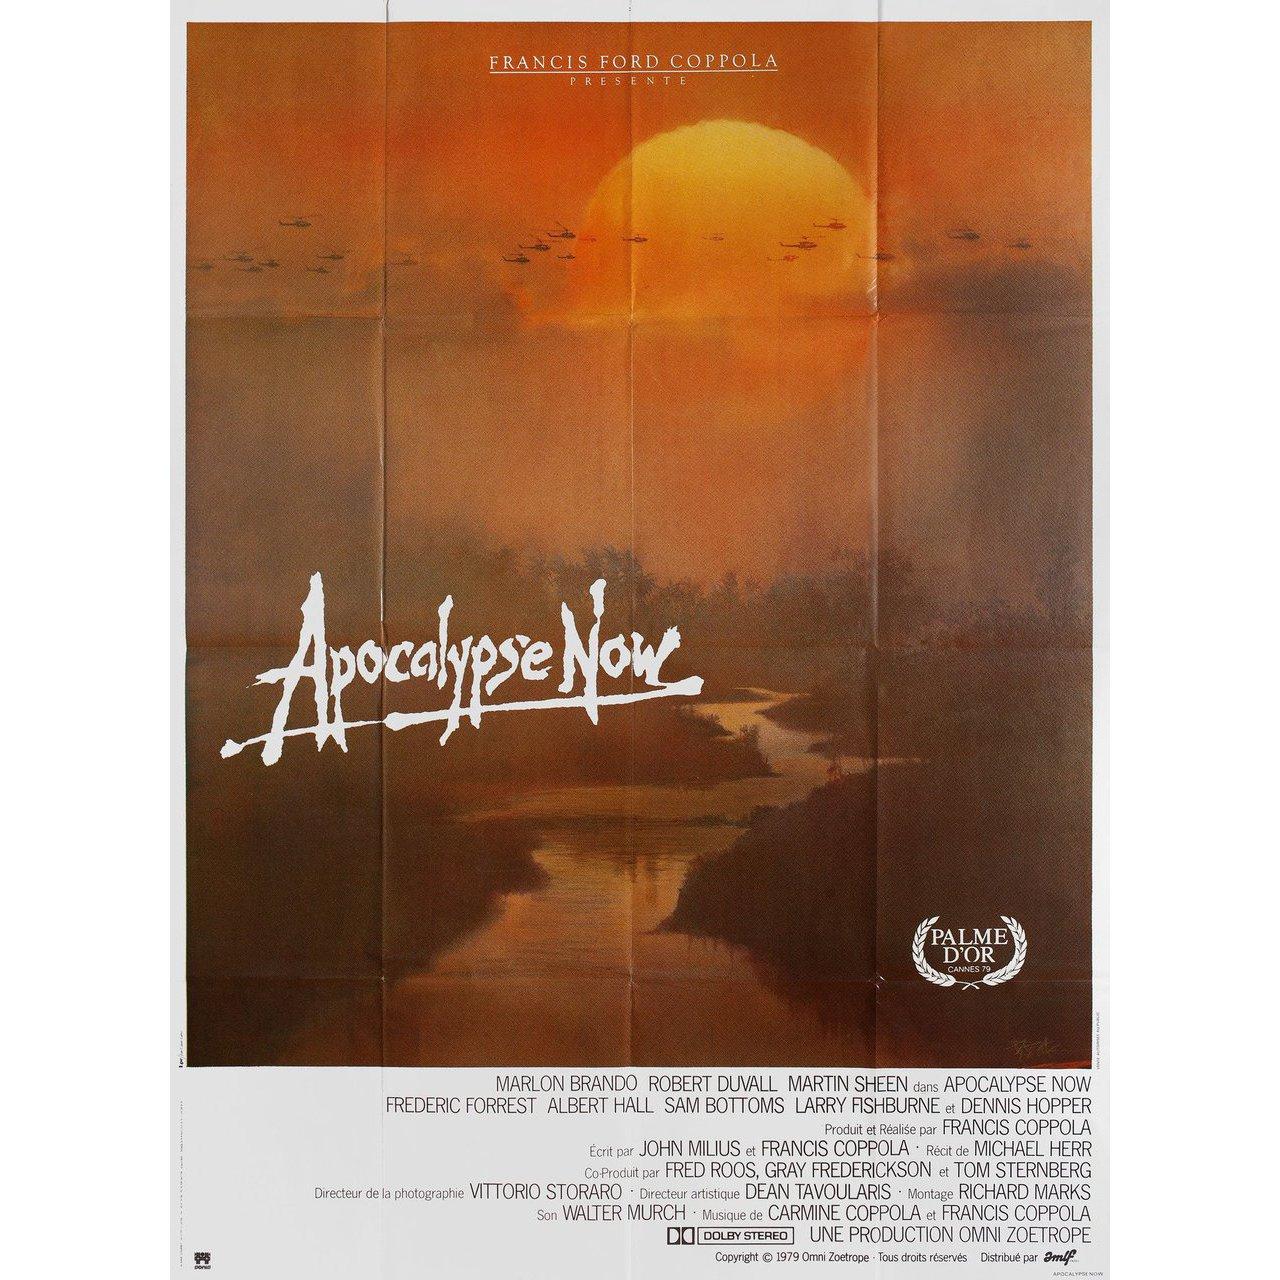 Original 2001 re-release French grande poster for the 1979 film 'Apocalypse Now' directed by Francis Ford Coppola with Marlon Brando / Martin Sheen / Robert Duvall / Frederic Forrest. Fine condition, folded. Many original posters were issued folded